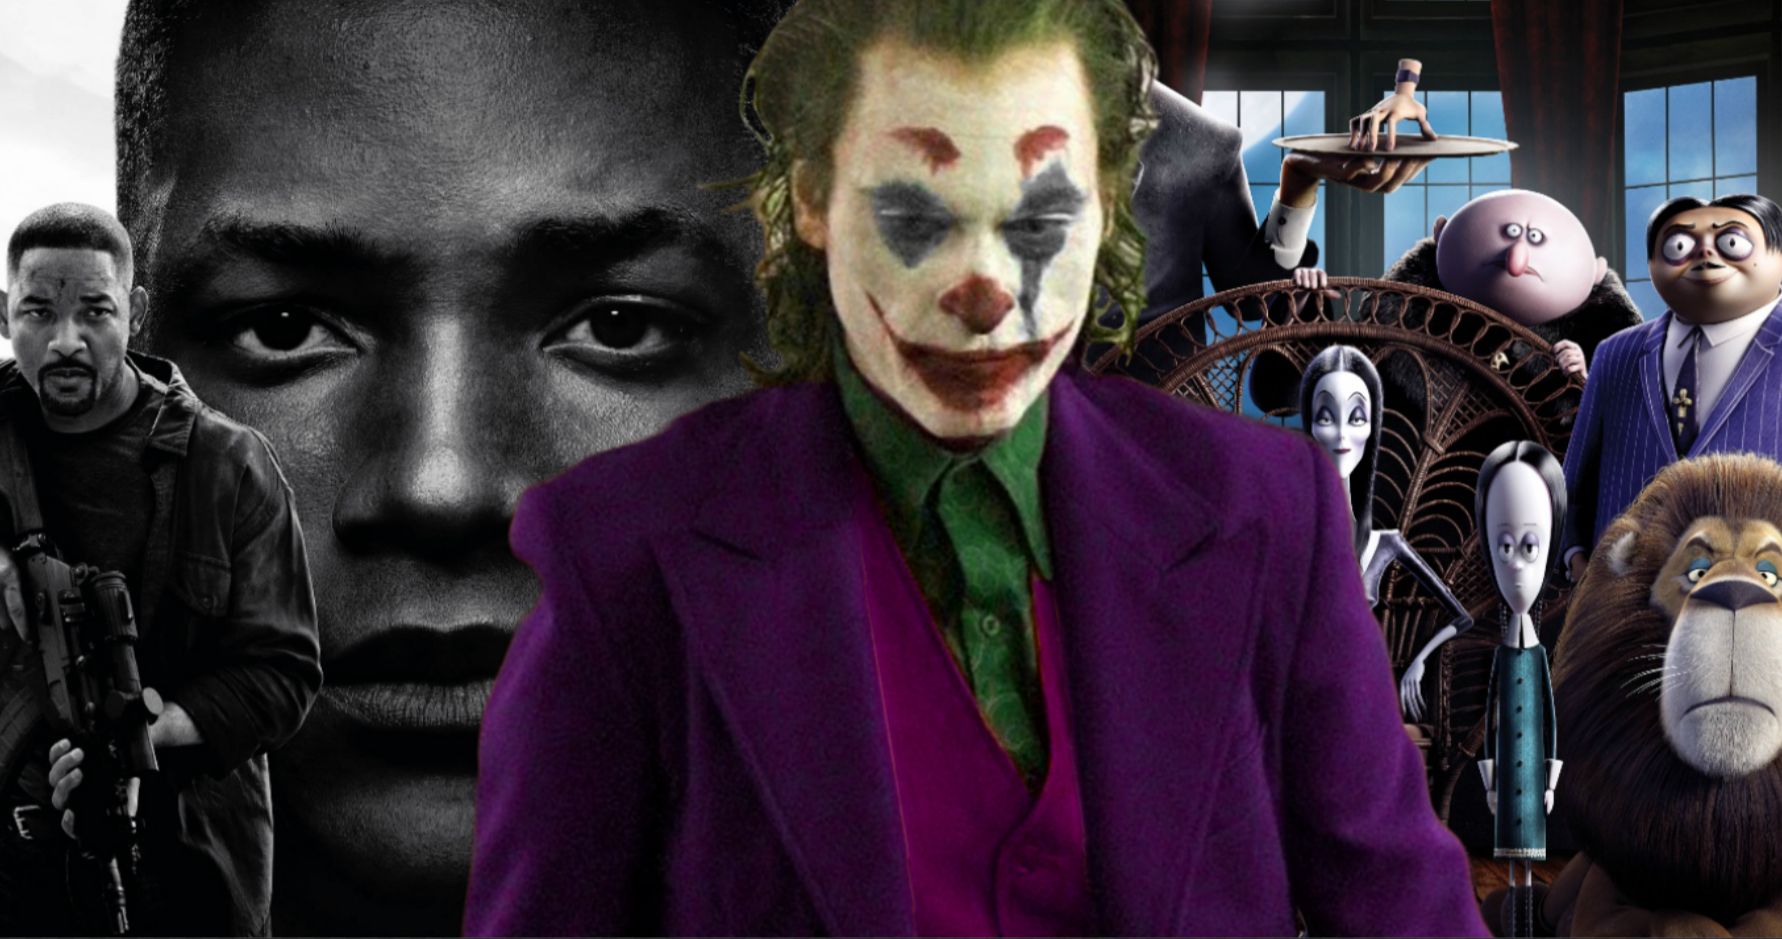 Can Joker Laugh Off Gemini Man &amp; The Addams Family at the Box Office?